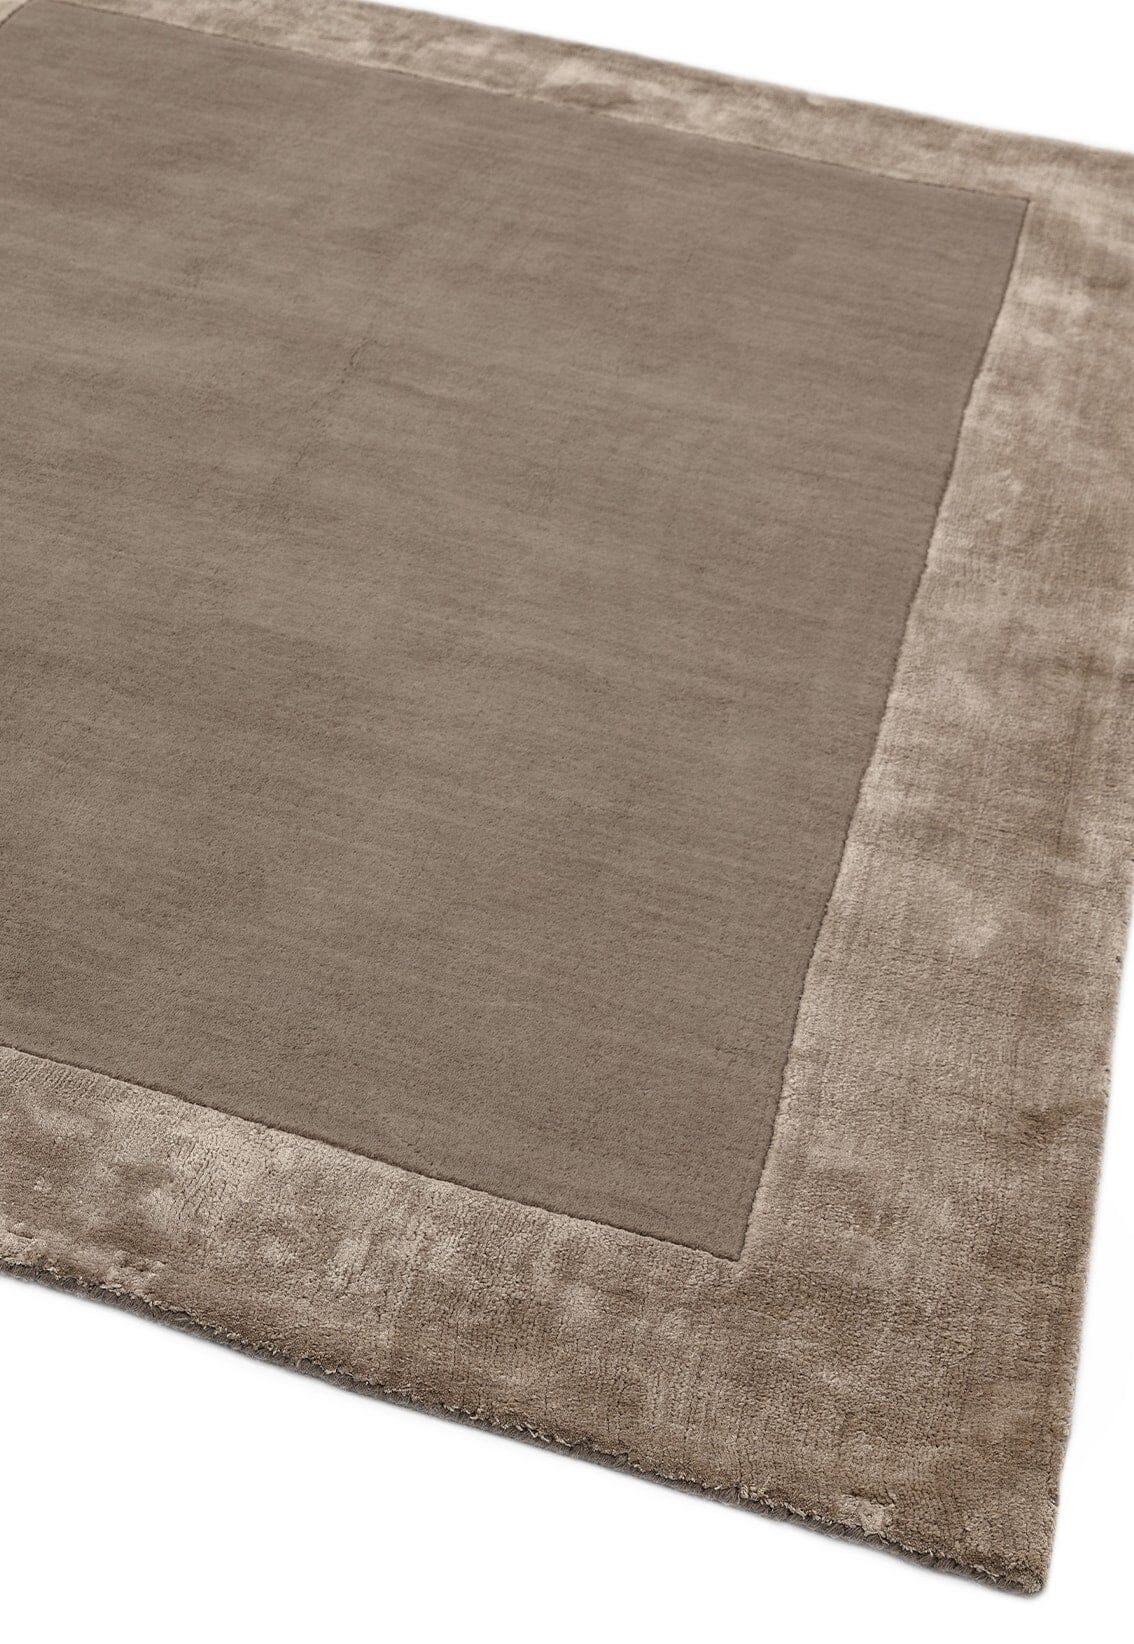  Asiatic Carpets-Asiatic Carpets Ascot Hand Woven Rug Taupe - 160 x 230cm-Beige, Natural 685 